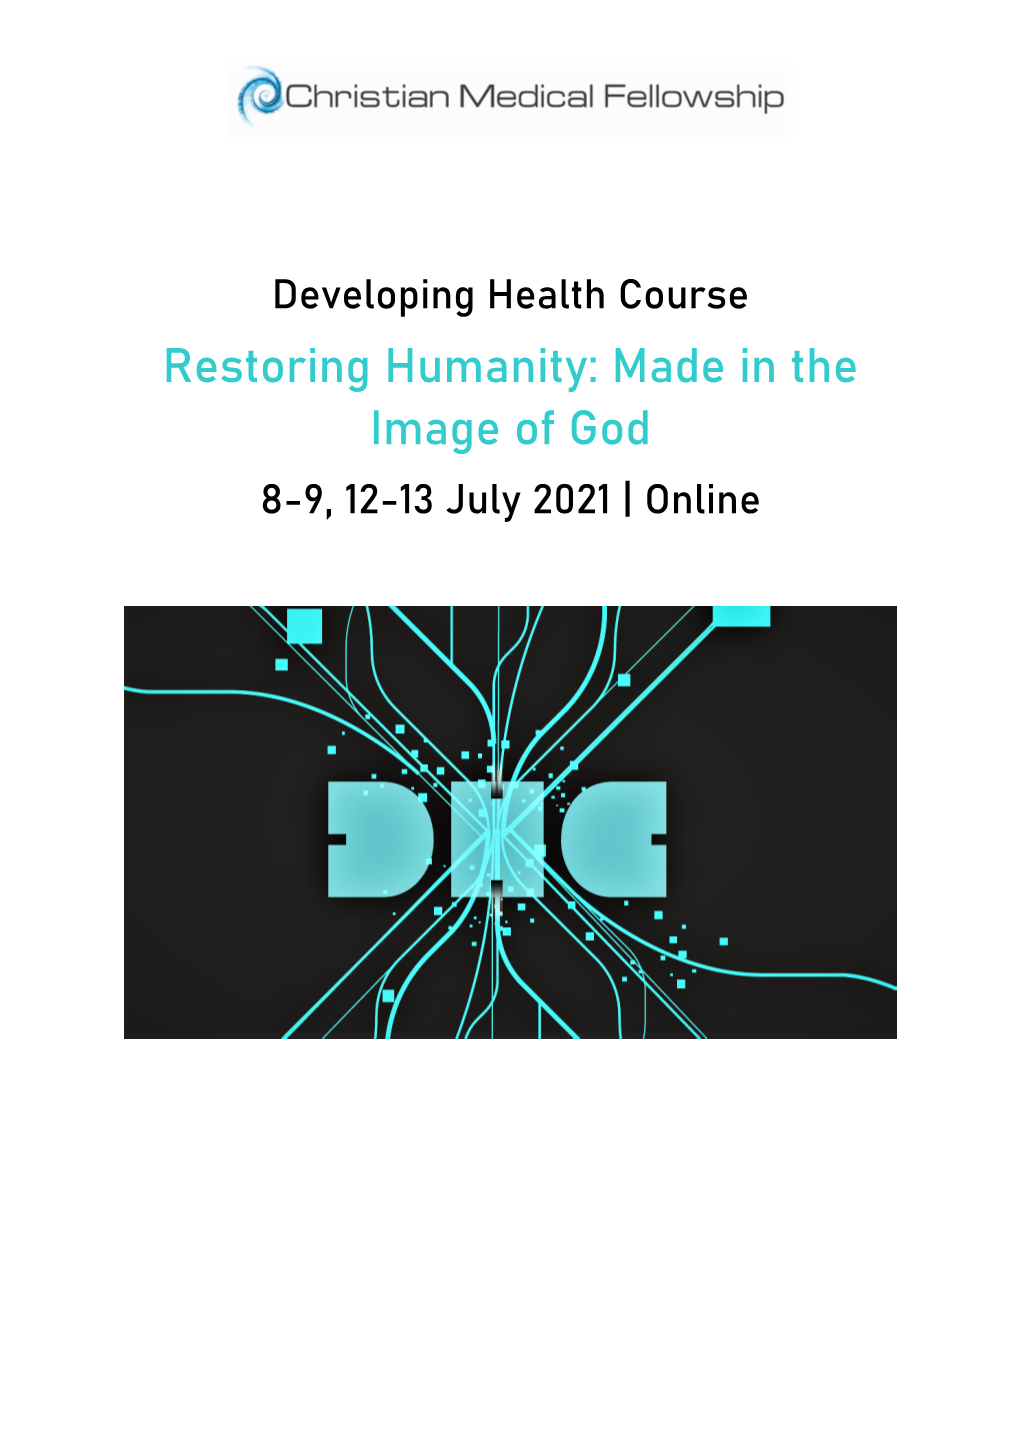 Made in the Image of God 8-9, 12-13 July 2021 | Online